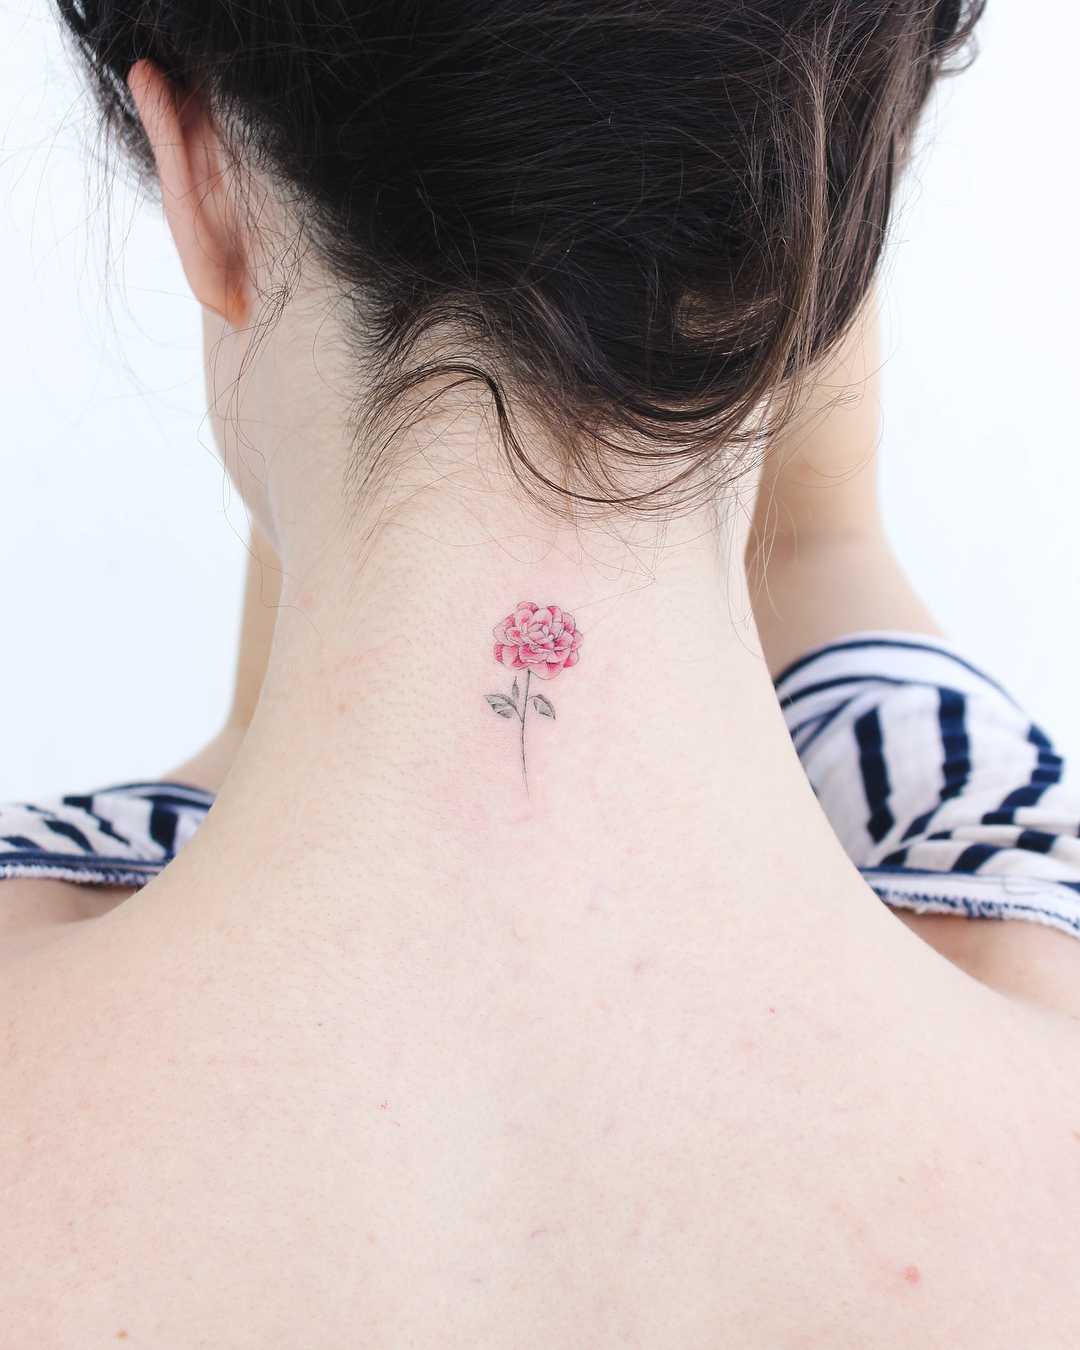 Premium Photo | A tattoo of a bird with a flower on the neck